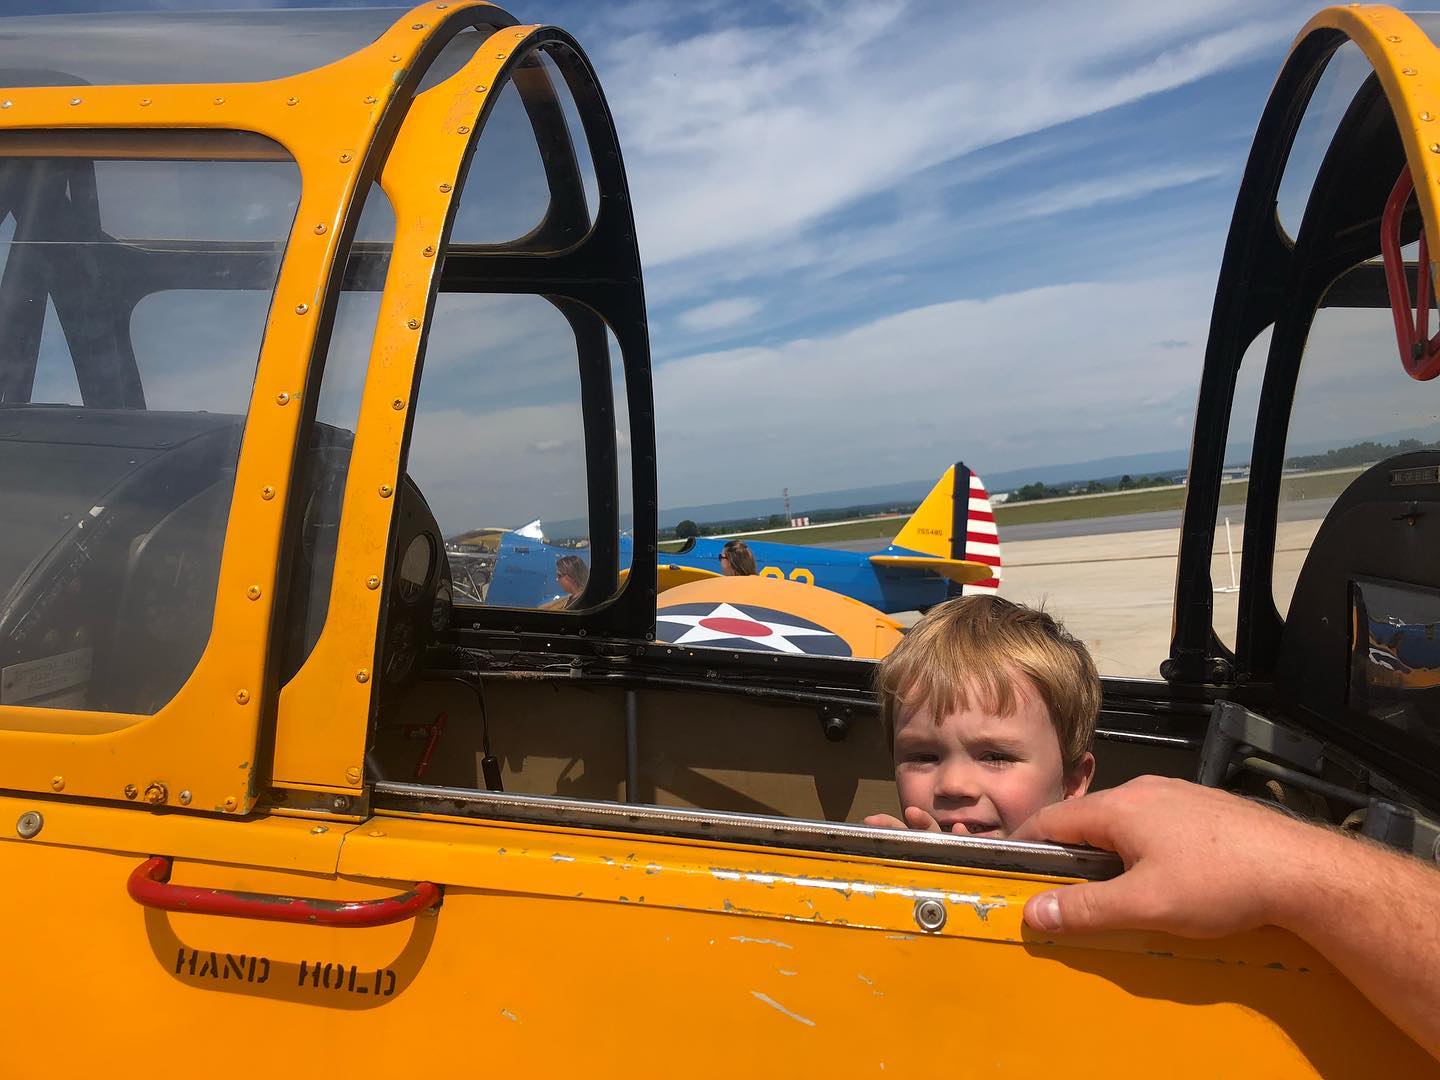 Flying a Plane and Splash Pad